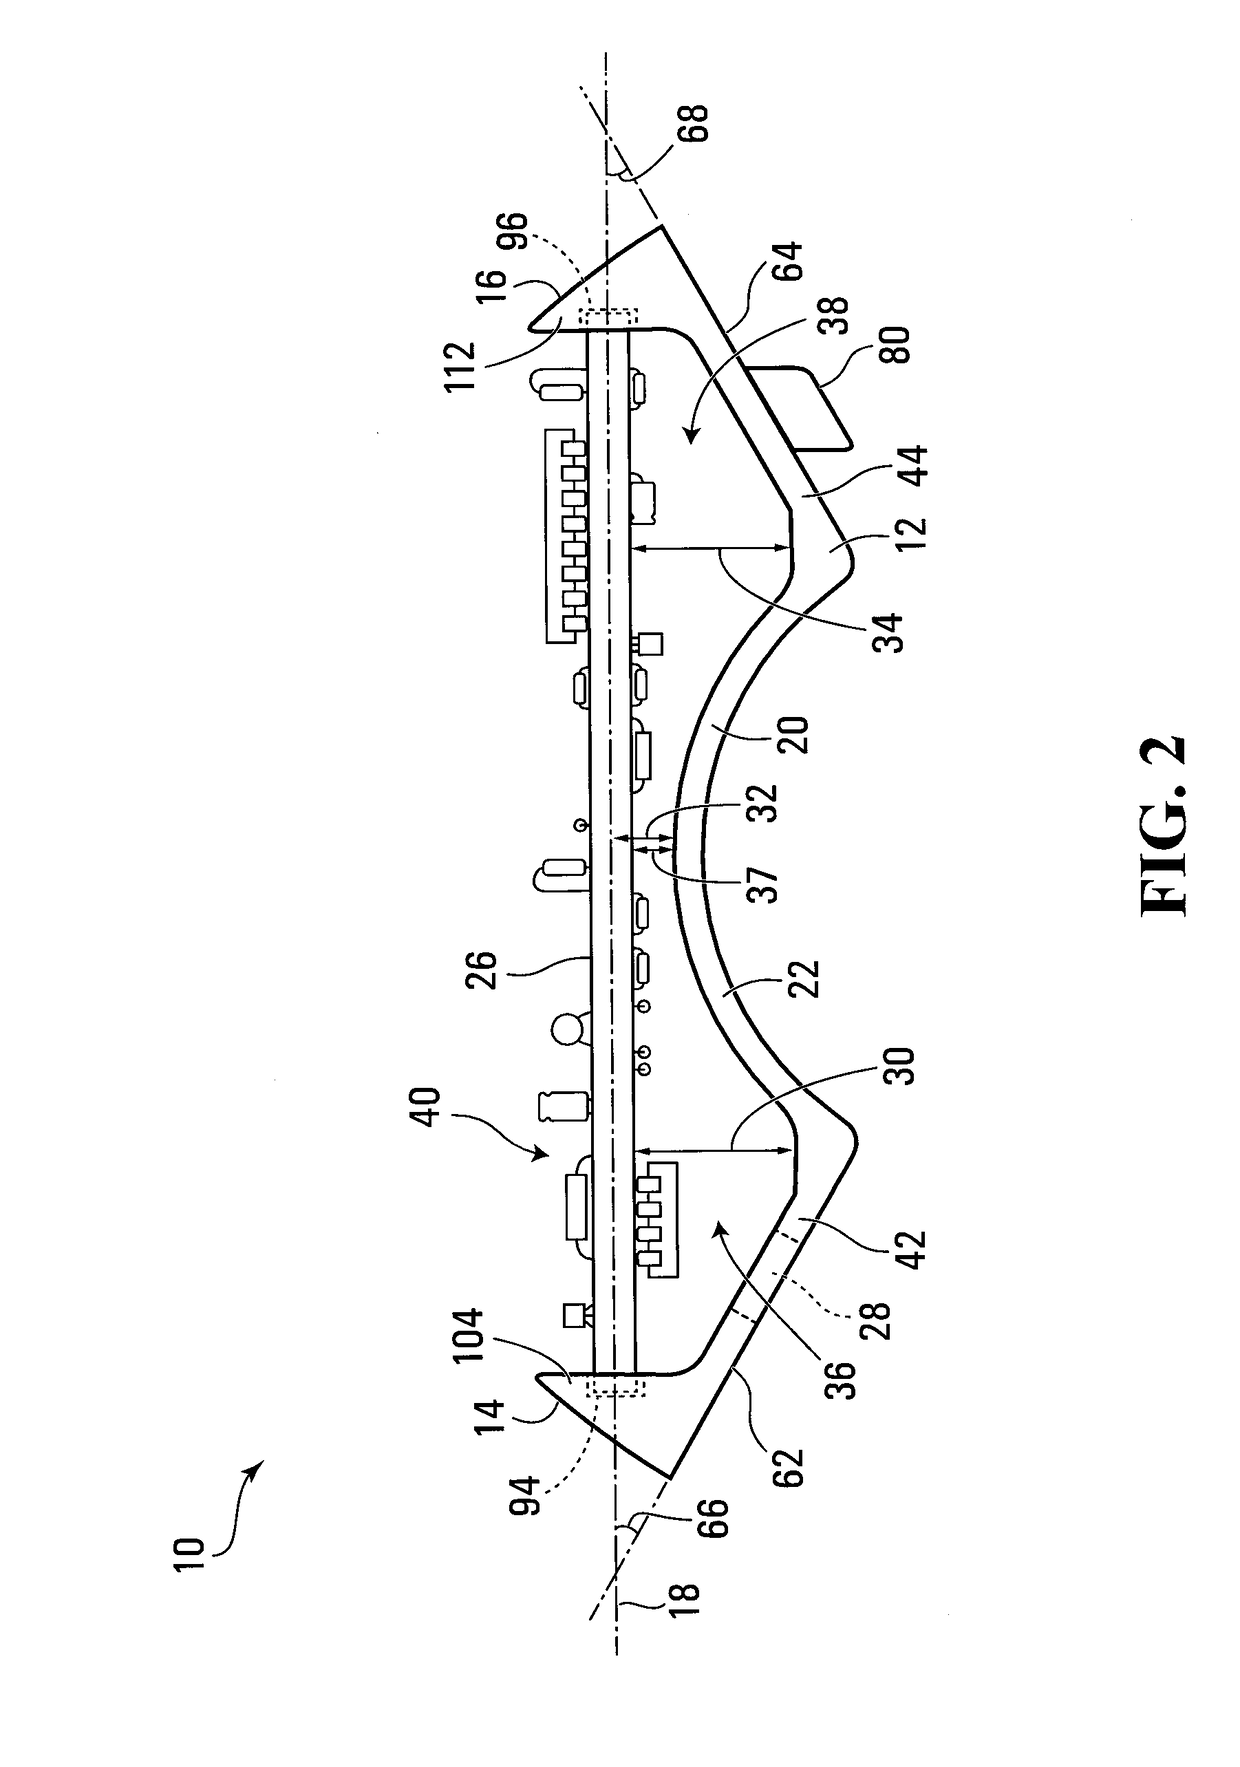 Mounting and component holder apparatuses and assemblies for holding rigid components